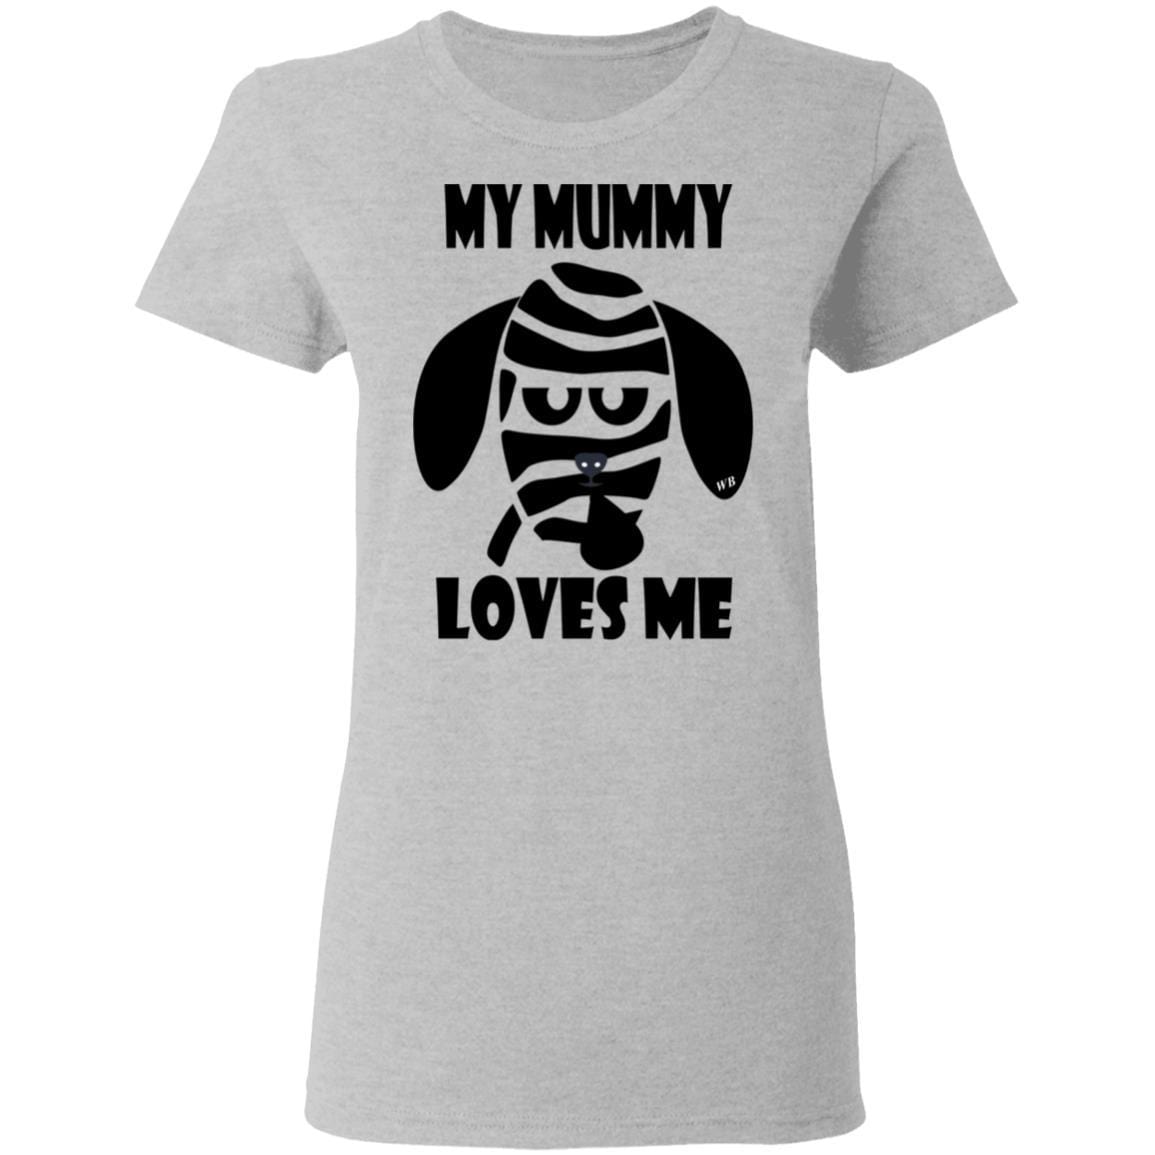 T-Shirts Sport Grey / S WineyBitches.Co "My Mummy Loves Me" Halloween Collection Ladies' 5.3 oz. T-Shirt WineyBitchesCo